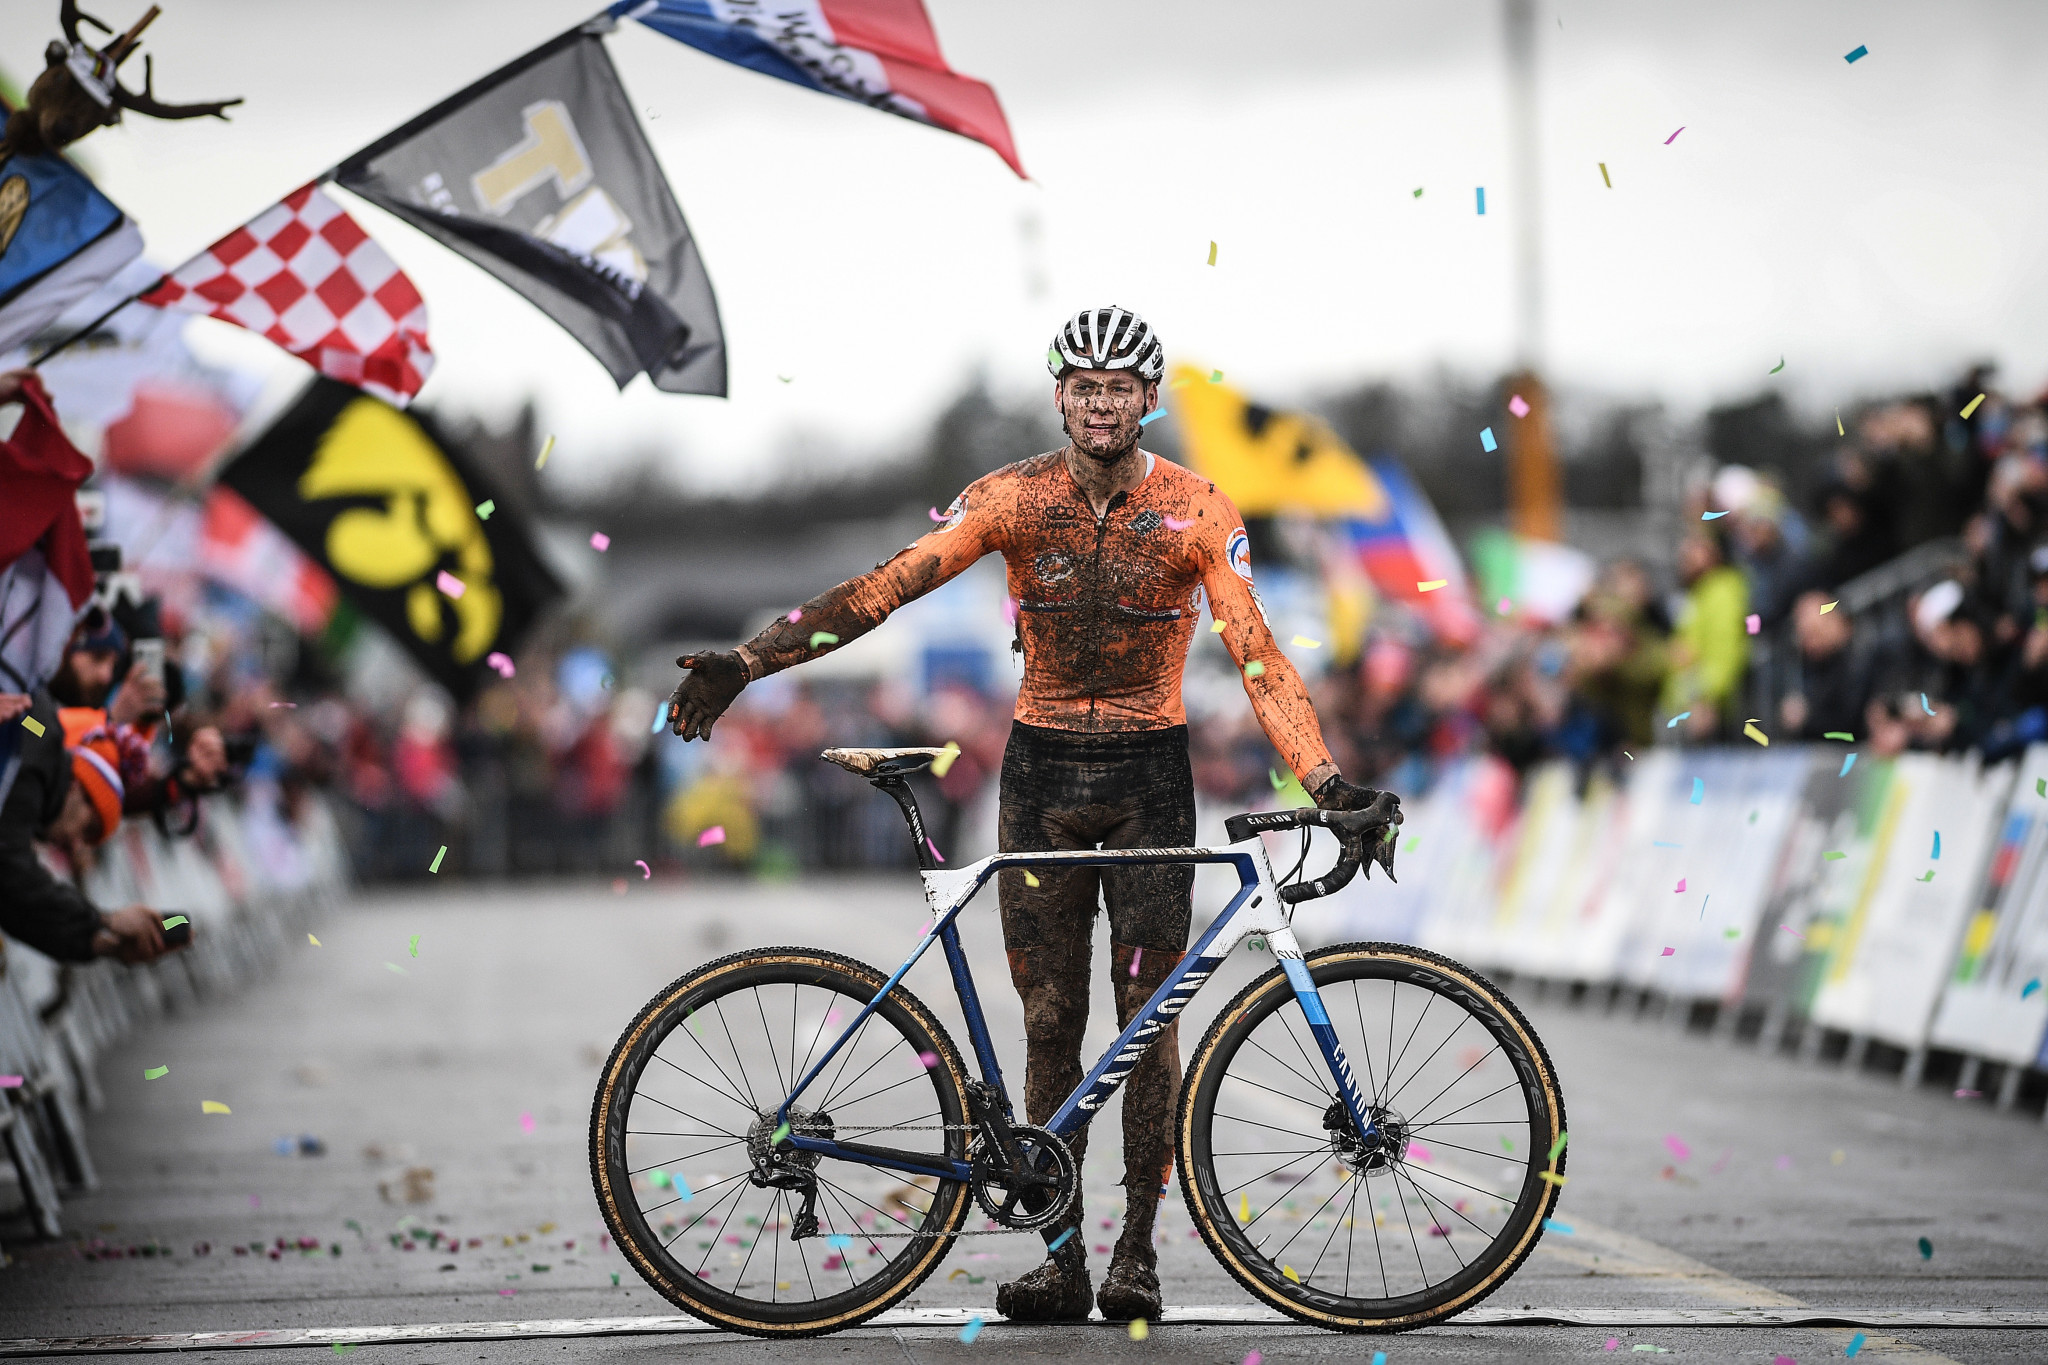 Van der Poel earns third title at UCI Cyclocross World Championships